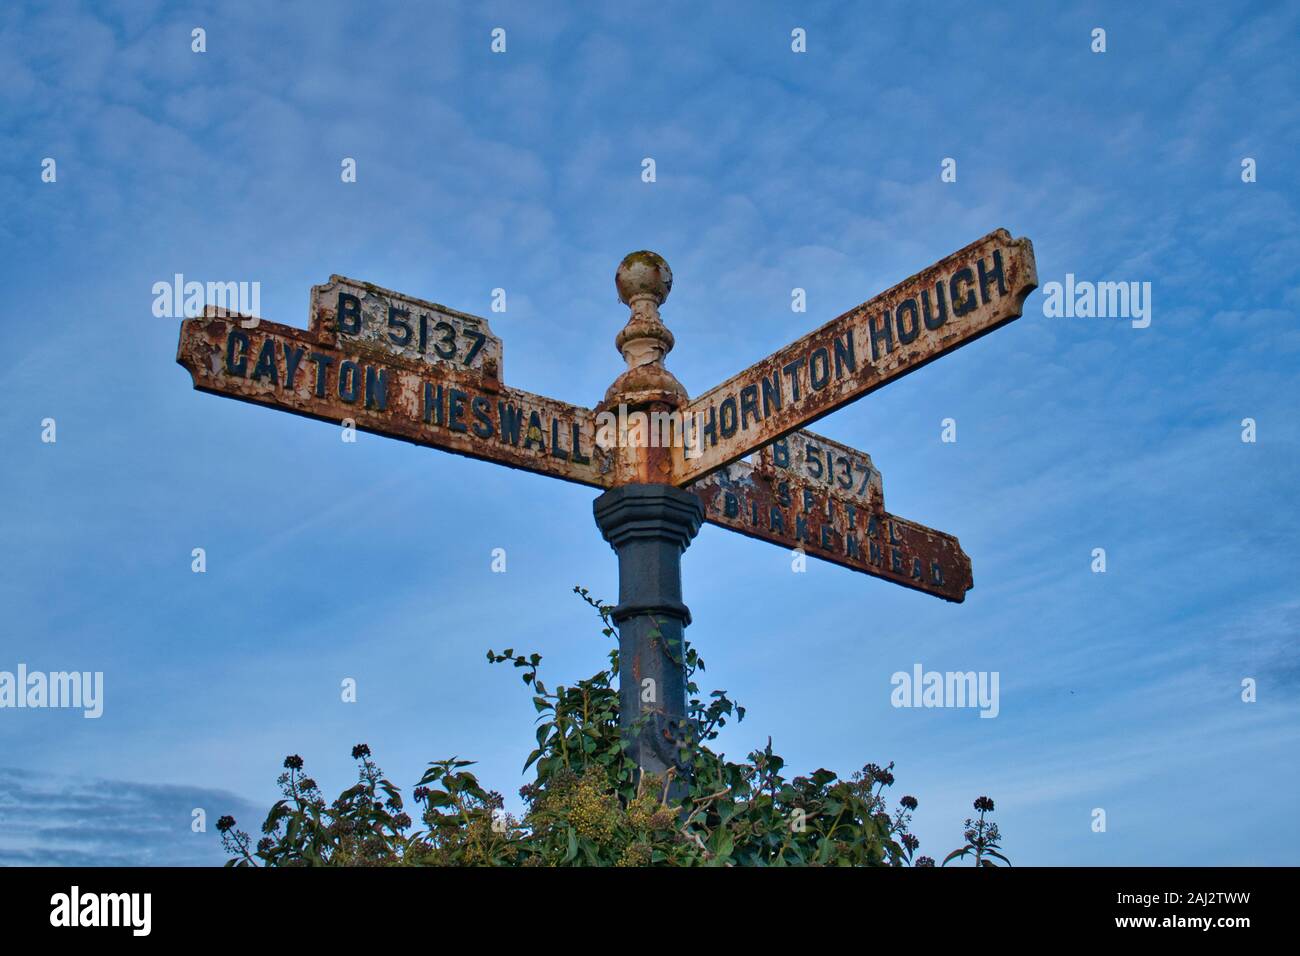 An old, rusting sign showing directions to Gayton, Heswall, Thornton Hough and Birkenhead in Wirral, UK Stock Photo